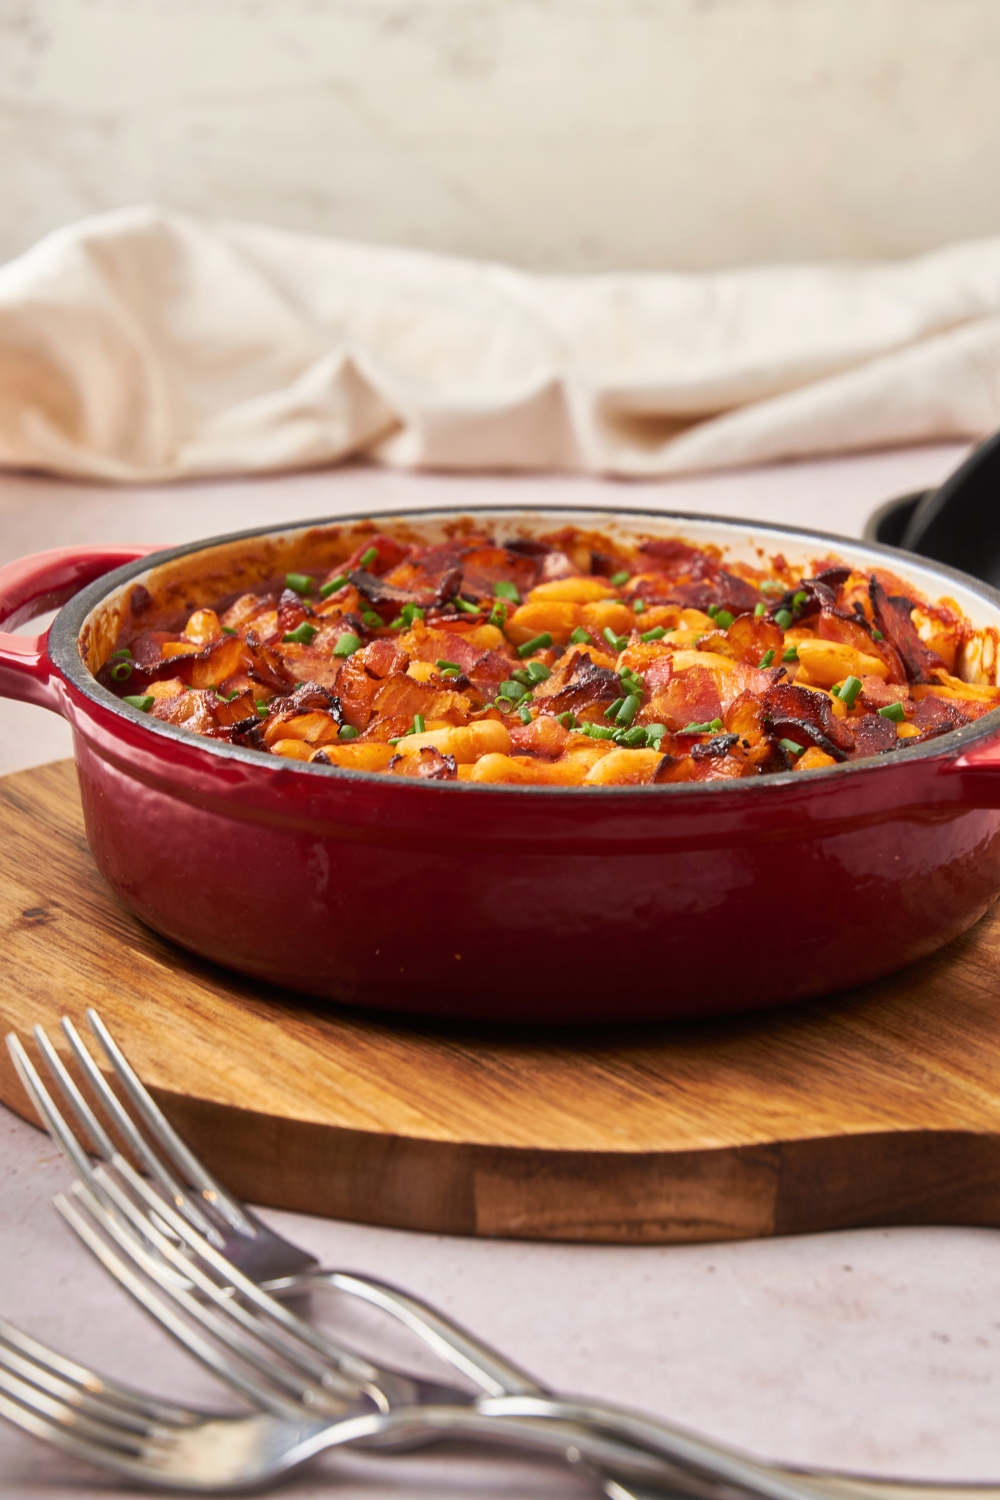 A round baking dish that is filled with baked bean casserole.